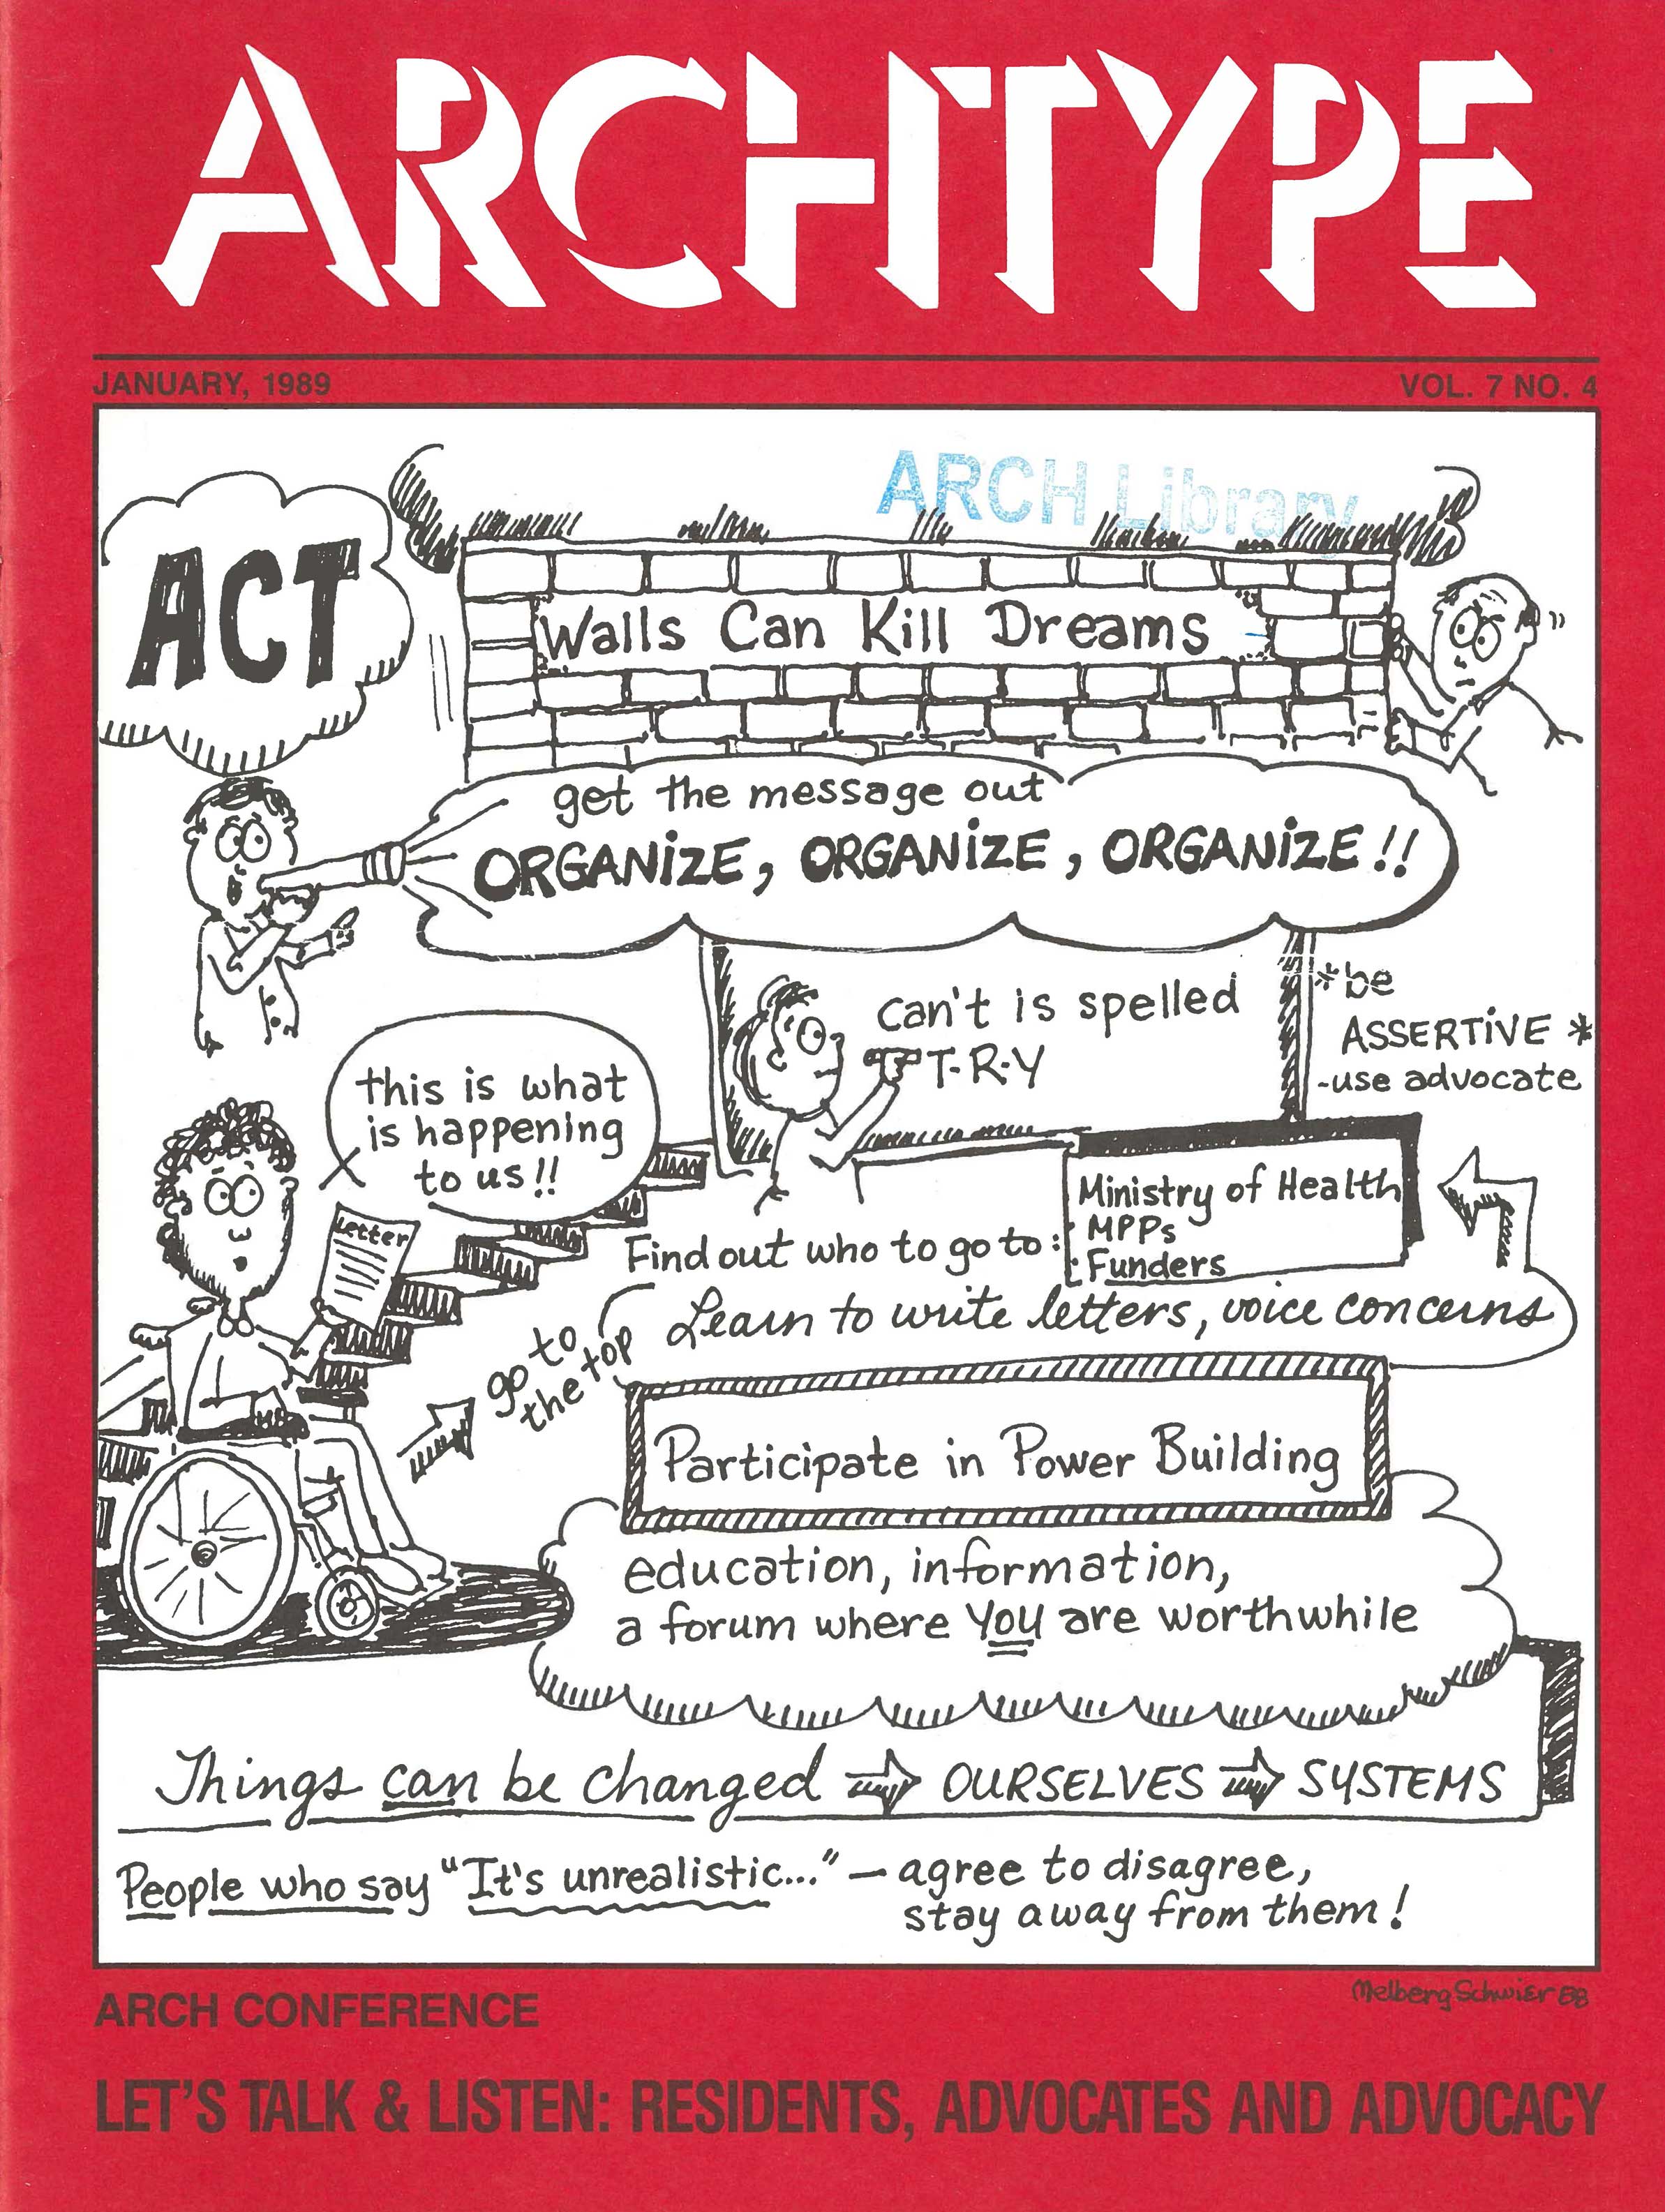 ARCHTYPE journal with red border. Inside the border is an illustration with text. Under the illustration says, “Let’s Talk & Listen: Residents, Advocates and Advocacy.”